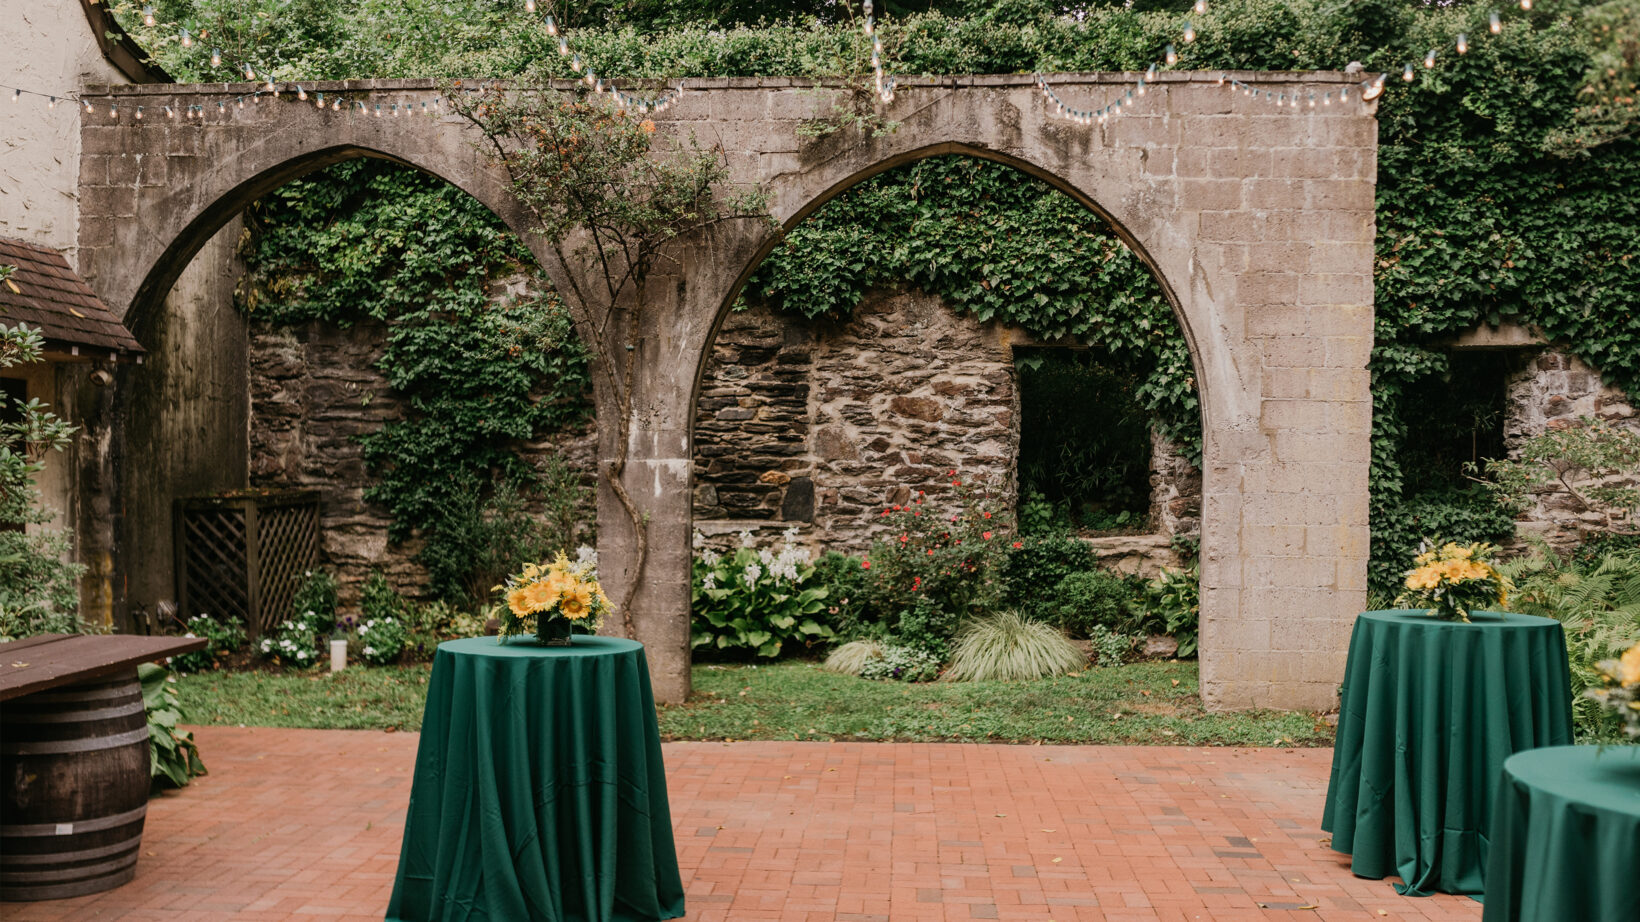 A few small round tables covered in a green table cloth outside on a stone patio next to stone archways